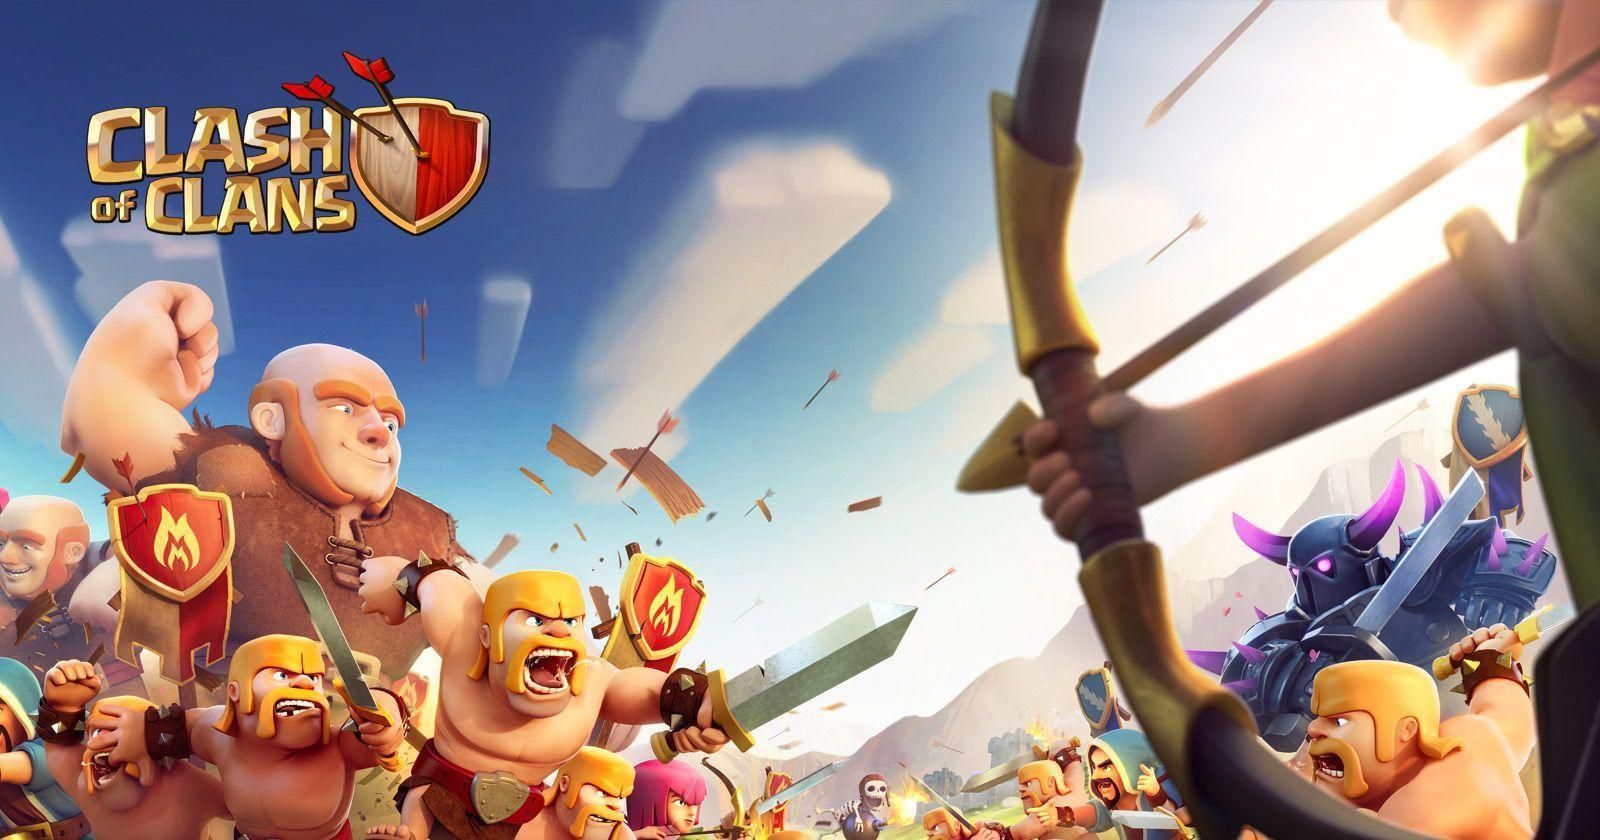 Flowing Fountain Clash of Clans